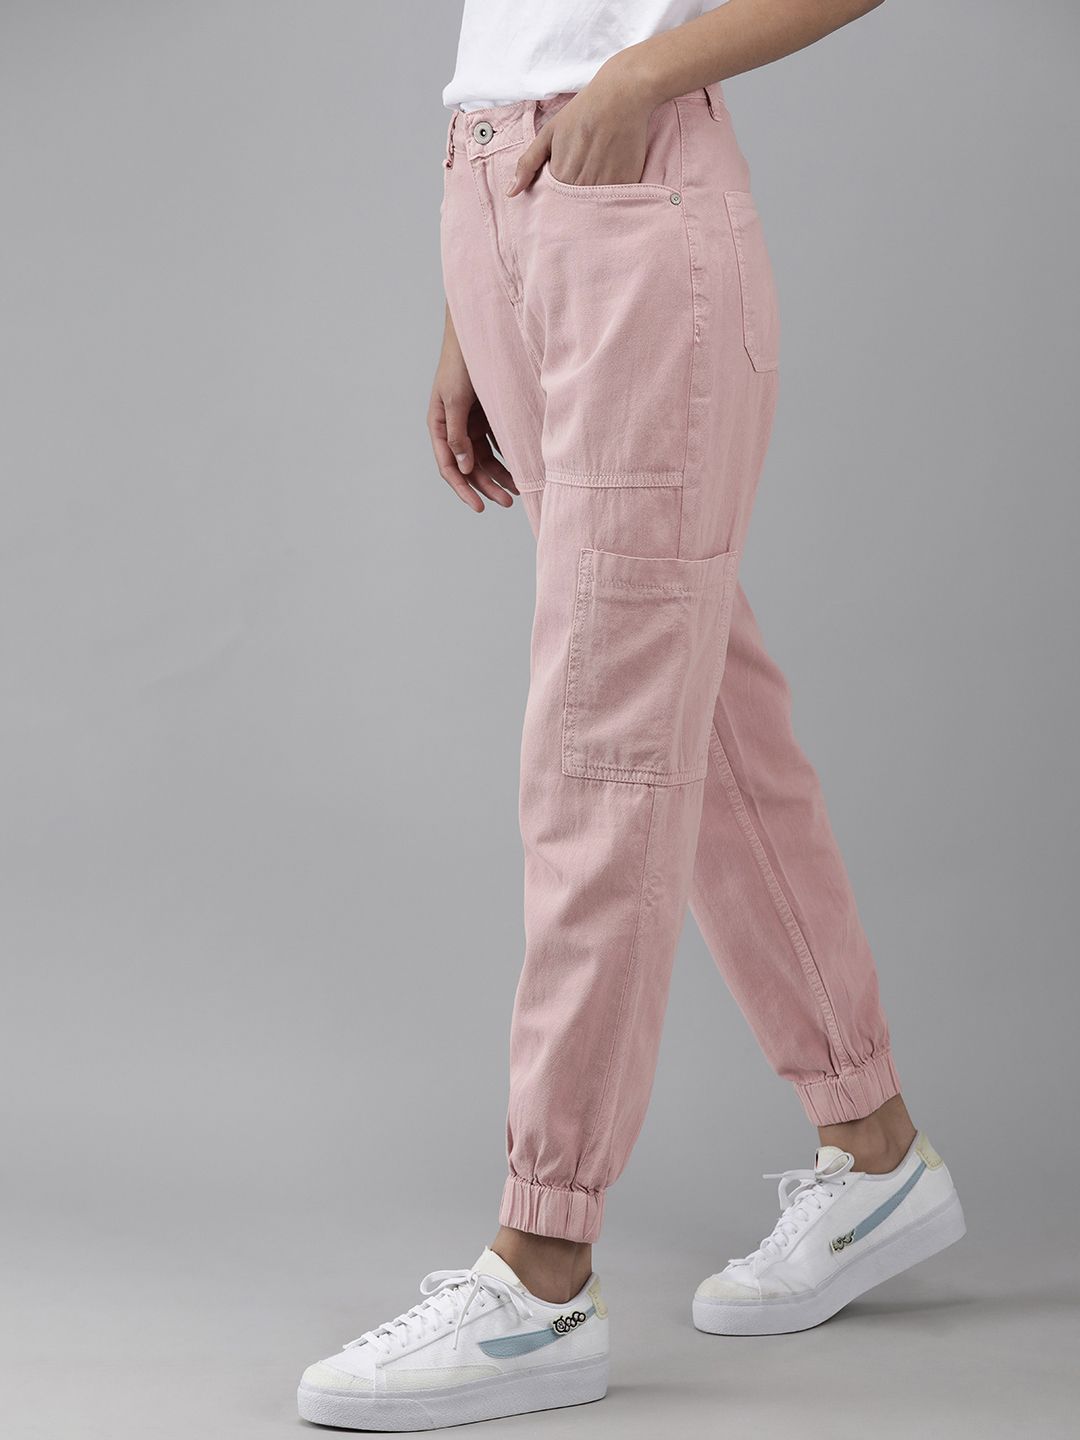 The Roadster Lifestyle Co Women Rose Jogger Jeans Price in India